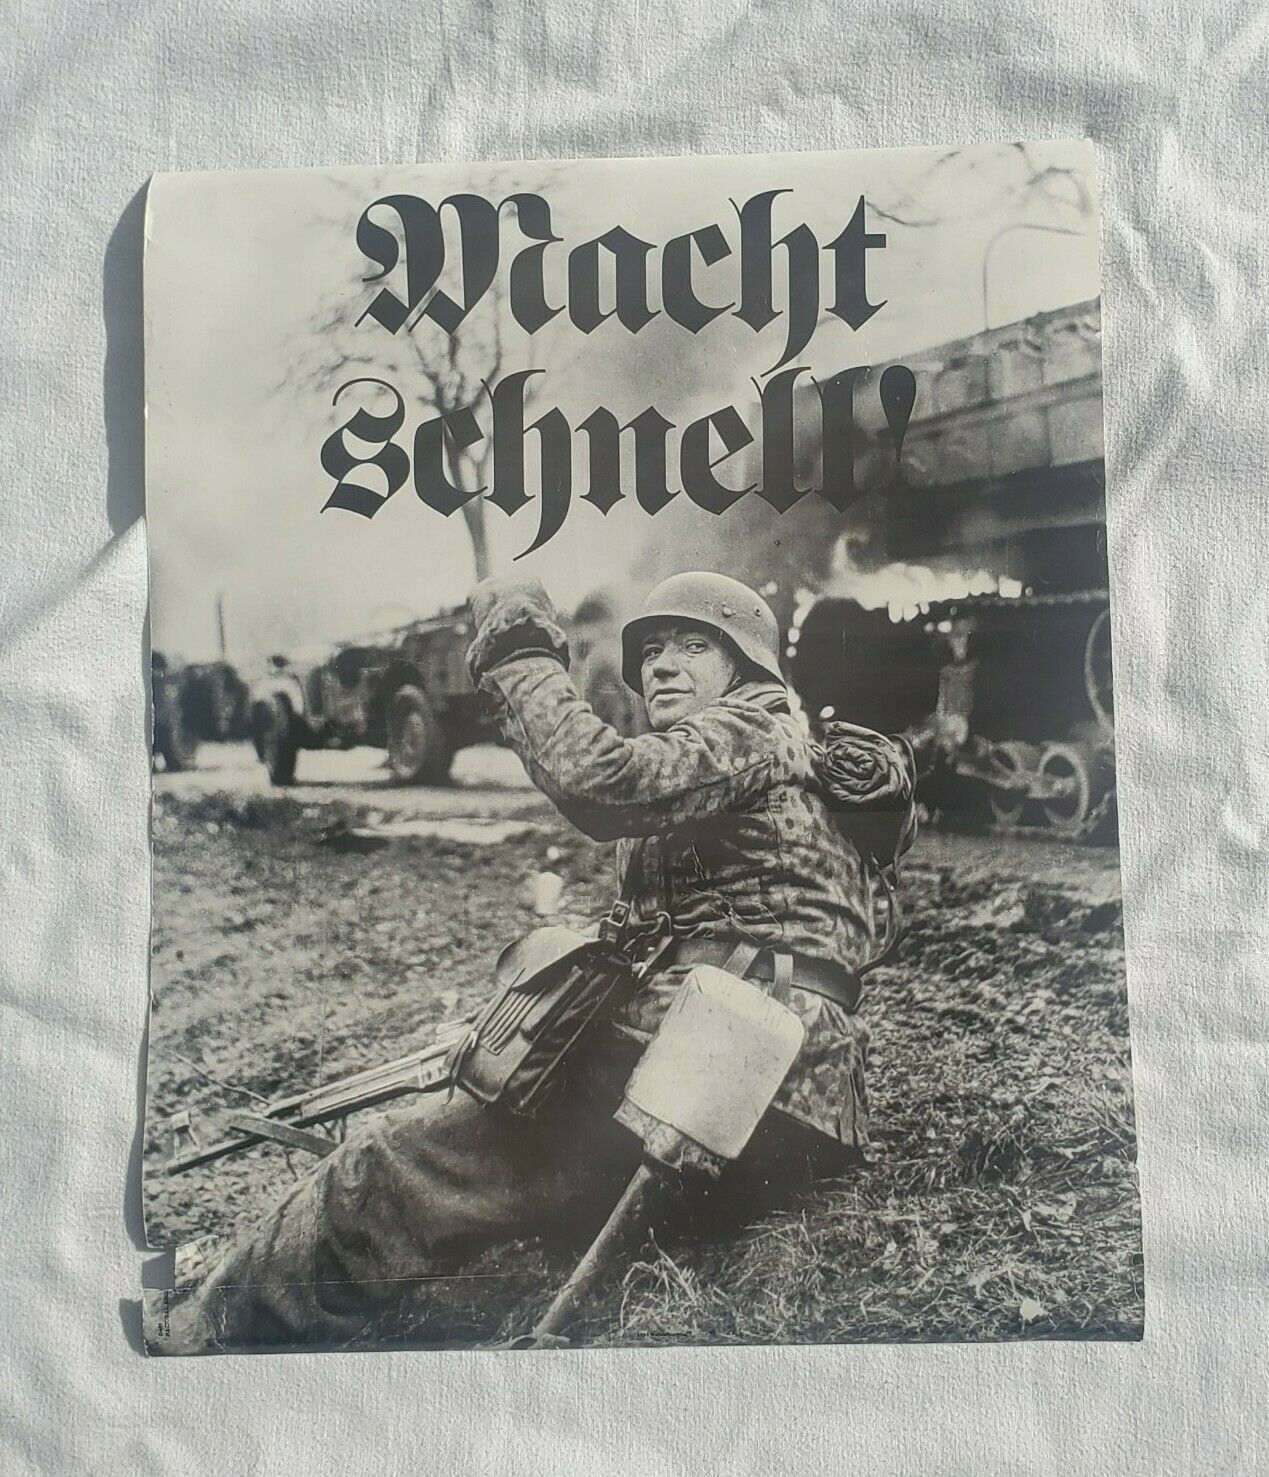 Reproduction Wwii German Propaganda Poster "macht Schnell"!!!!!!!!!!!!!!!!!!!!!!